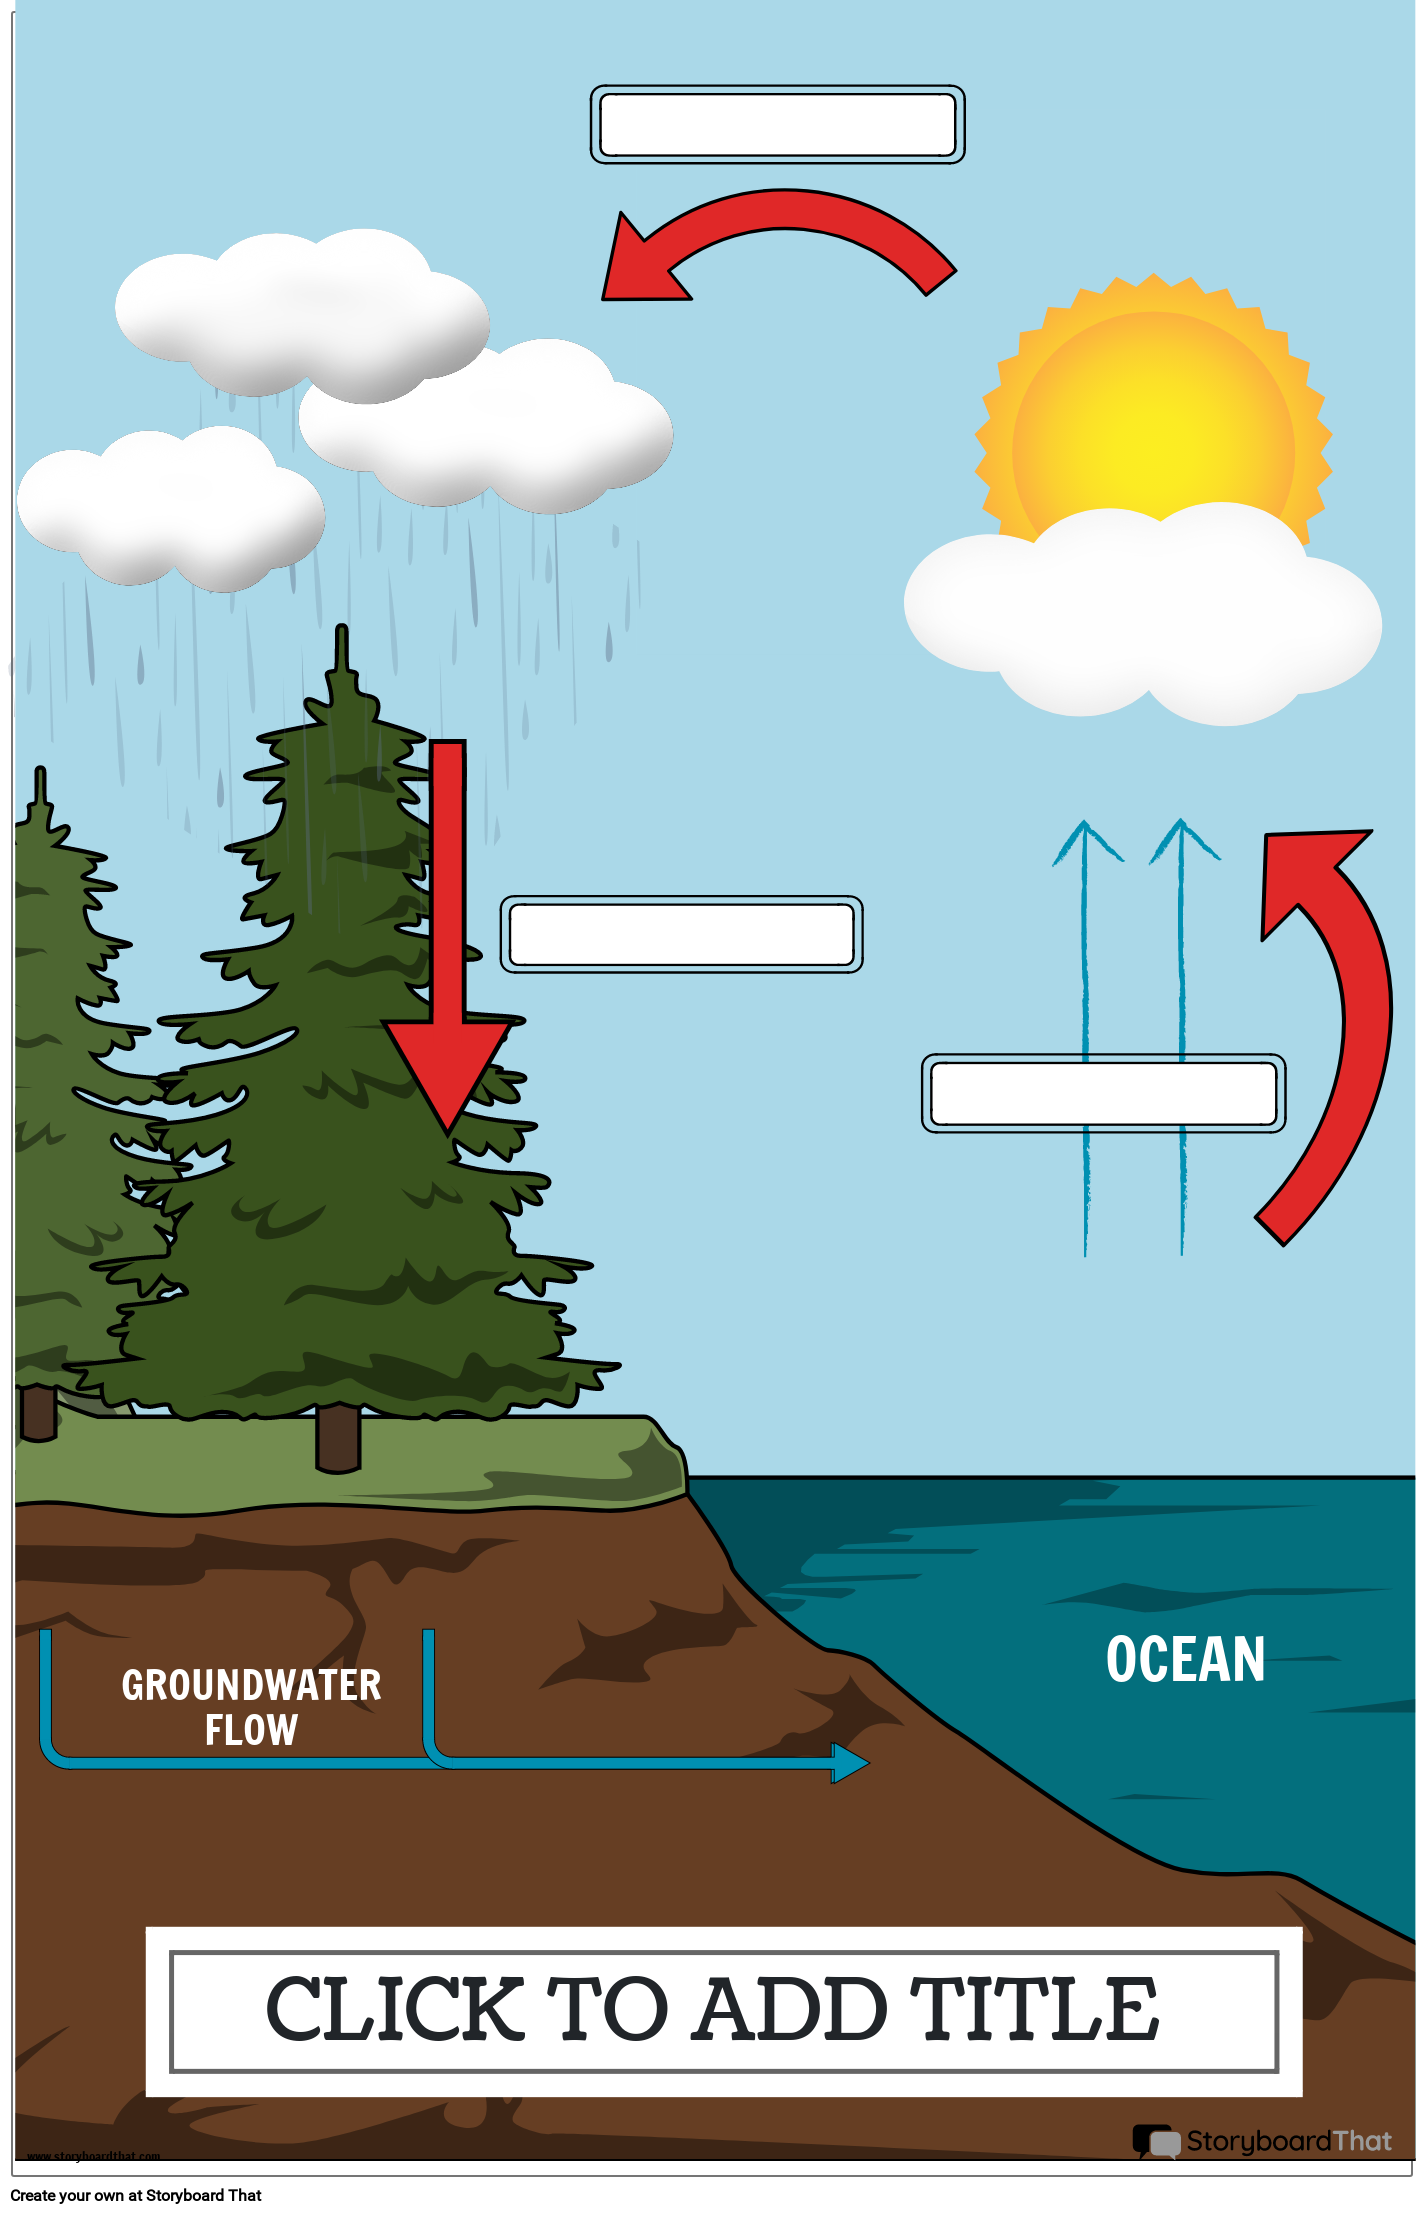 Water cycle | Definition, Steps, Diagram, & Facts | Britannica